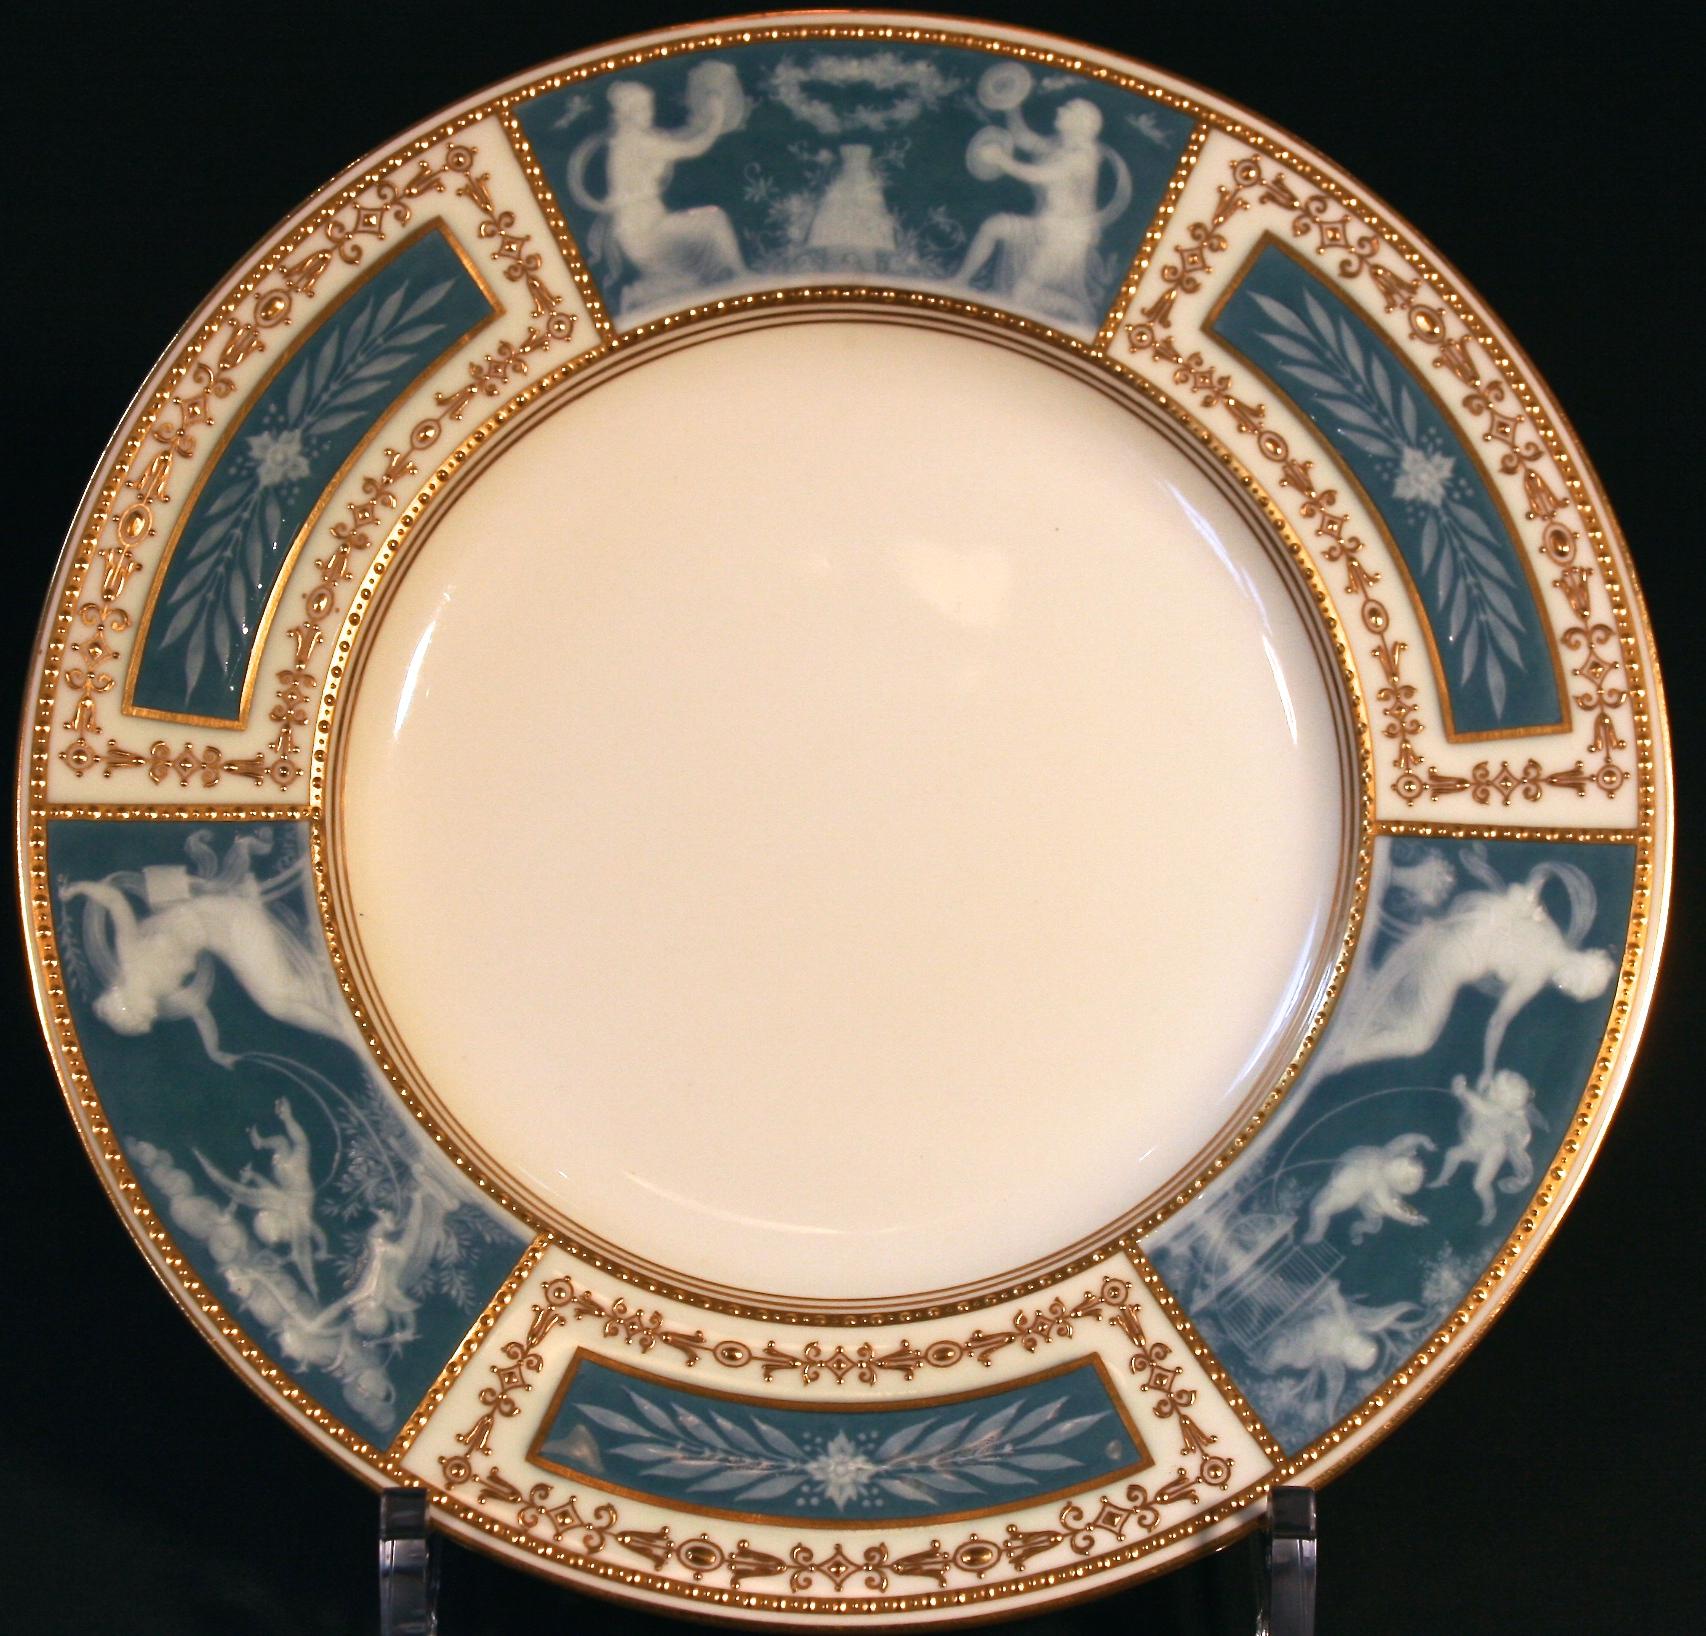 Here a set of 8 Tiffany blue Minton, Stoke-on-Trent, England pate-sur-pate service, cabinet or dinner plates in one of the most sought after of the pate-sur-pate designs. Each is decorated with three 22-karat gold beaded panels depicting Venus,